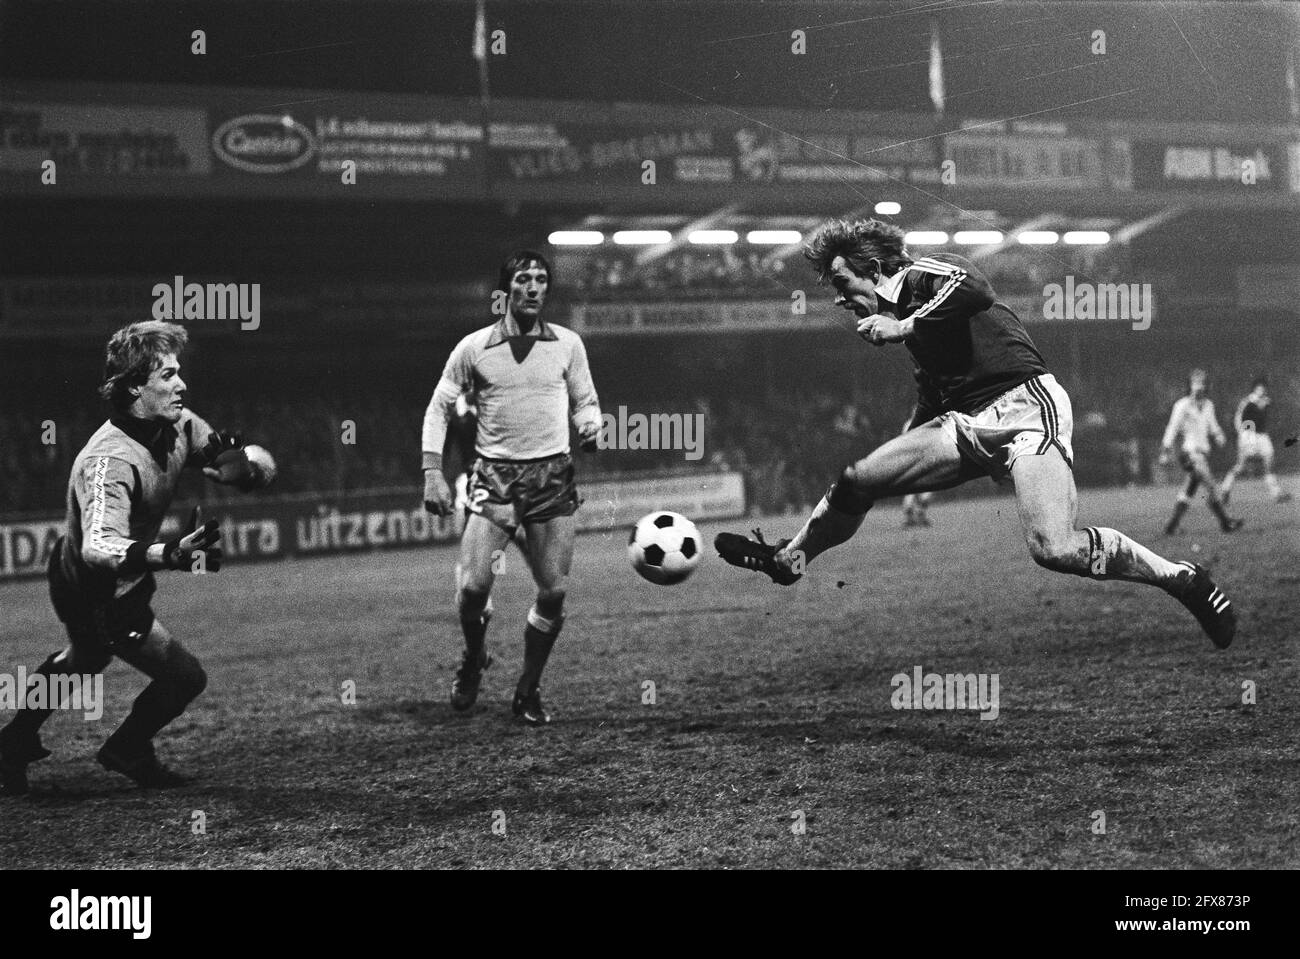 AZ 67 against FC Utrecht 2-0, (KNVB cup); Jaan de Graaf goes to score, goalkeeper van Breukelen, Utrecht player Wilbret, February 13, 1980, sports, soccer, The Netherlands, 20th century press agency photo, news to remember, documentary, historic photography 1945-1990, visual stories, human history of the Twentieth Century, capturing moments in time Stock Photo